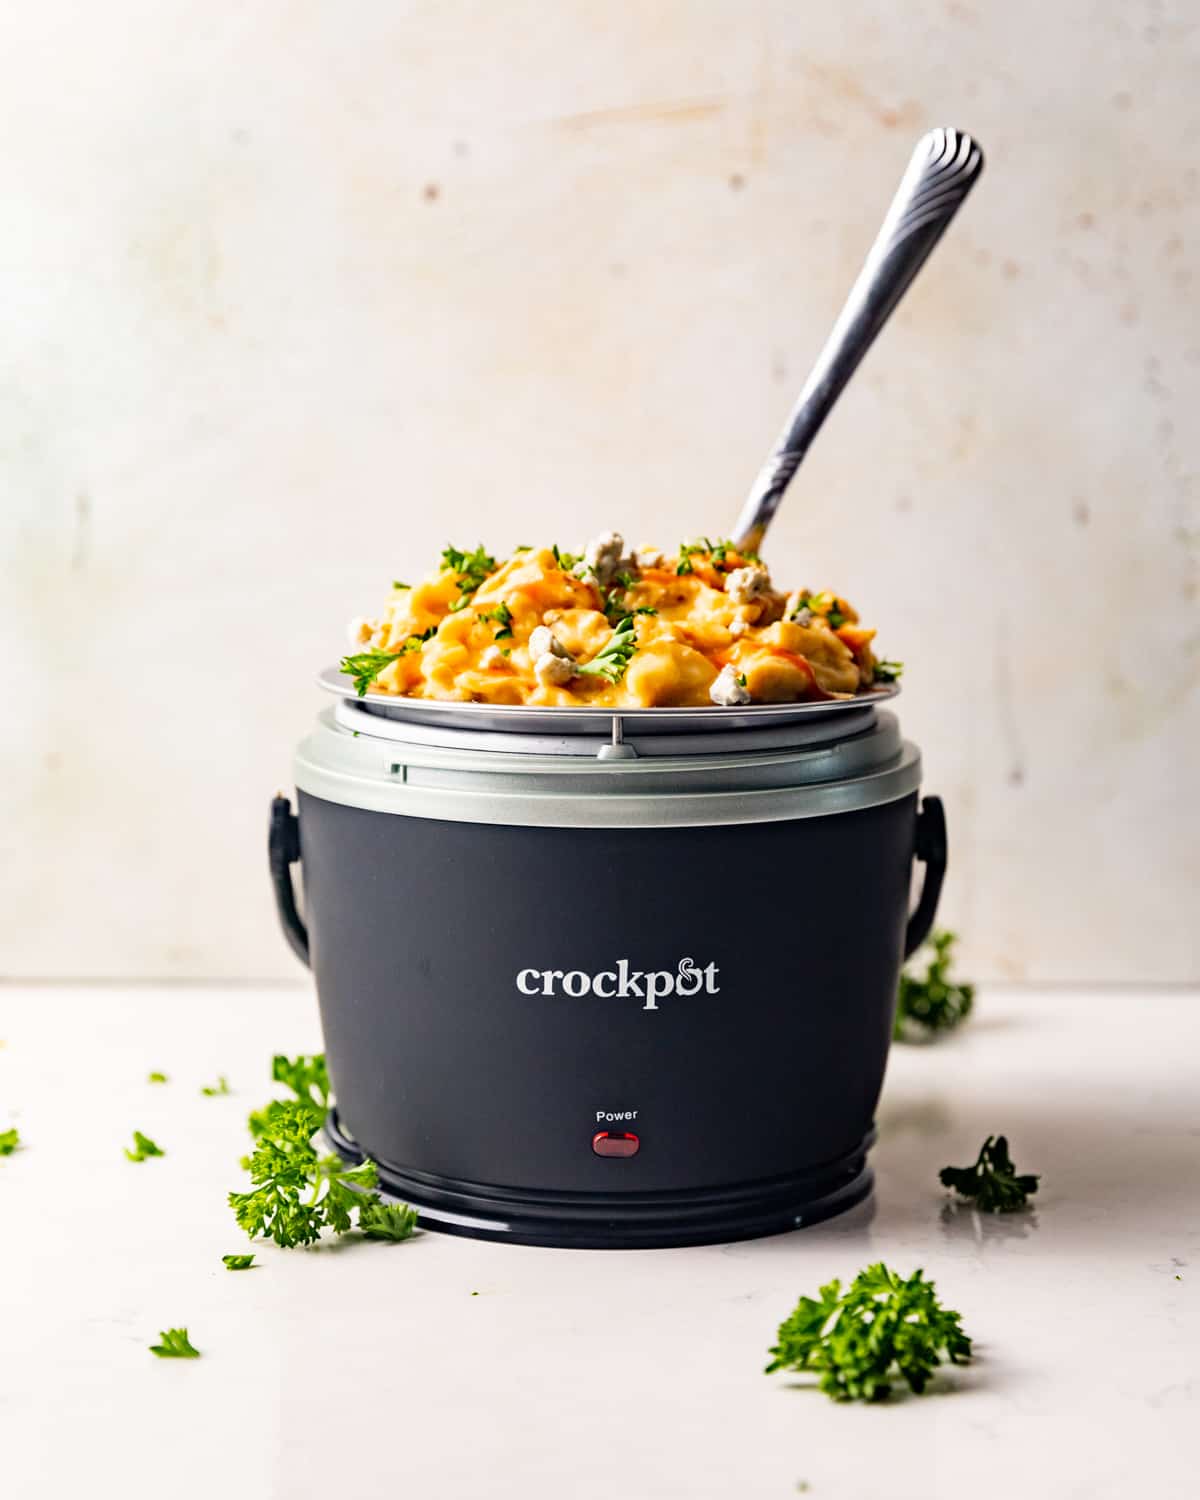 mac and cheese in a lunch crockpot.